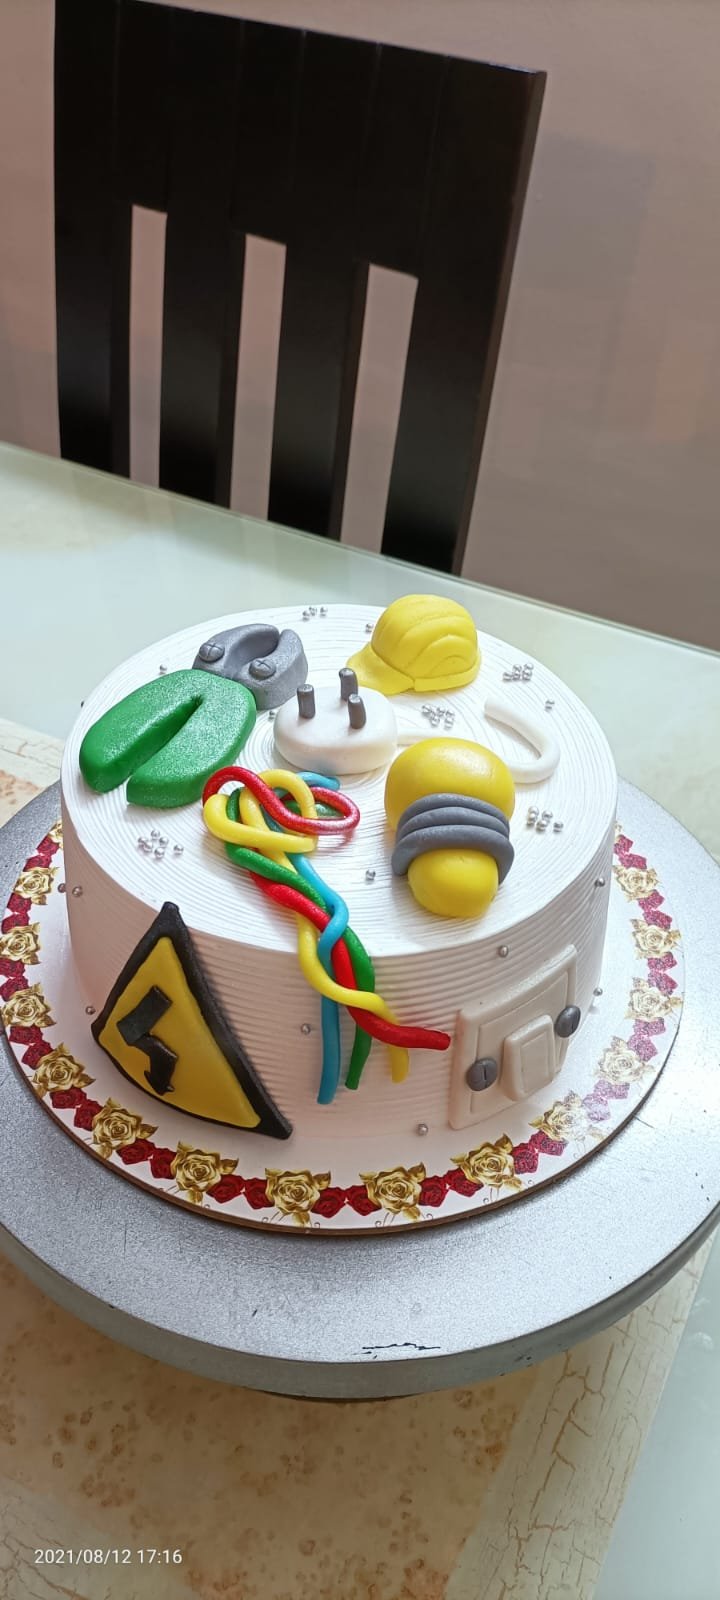 Birthday cake idea for engineers - Electrical Technology | Facebook